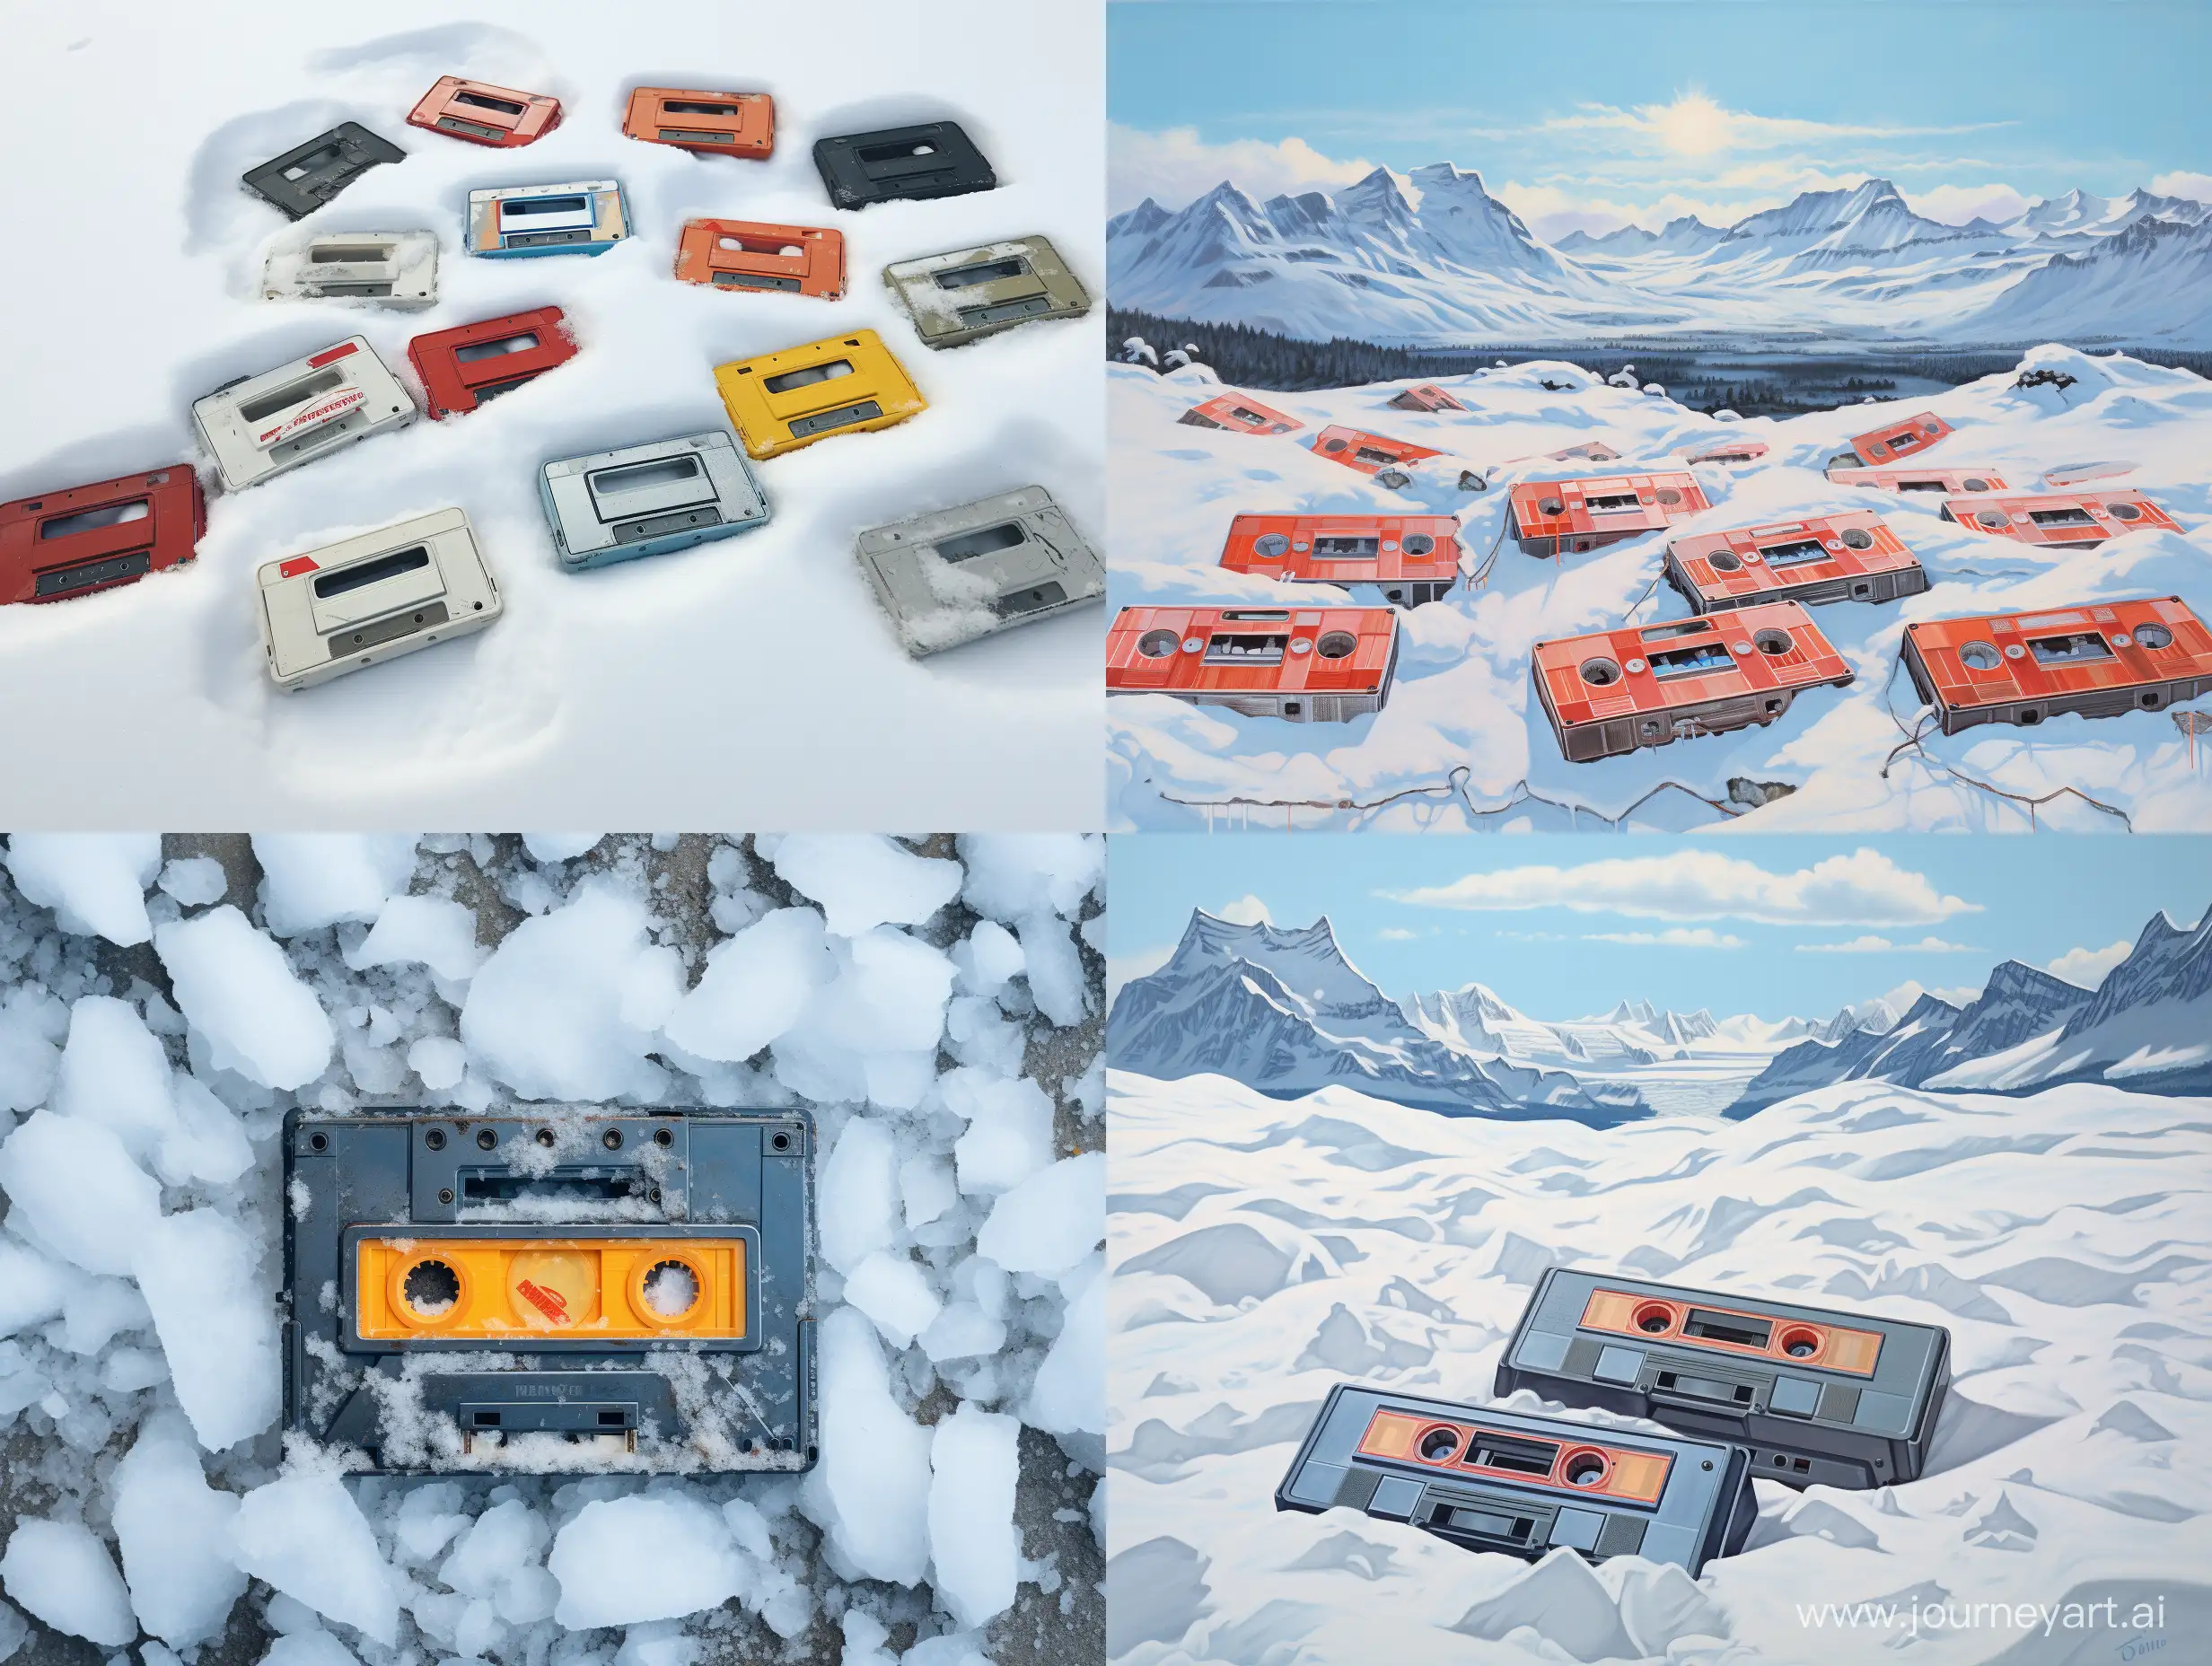 SnowCovered-Cassette-Tapes-in-Abundance